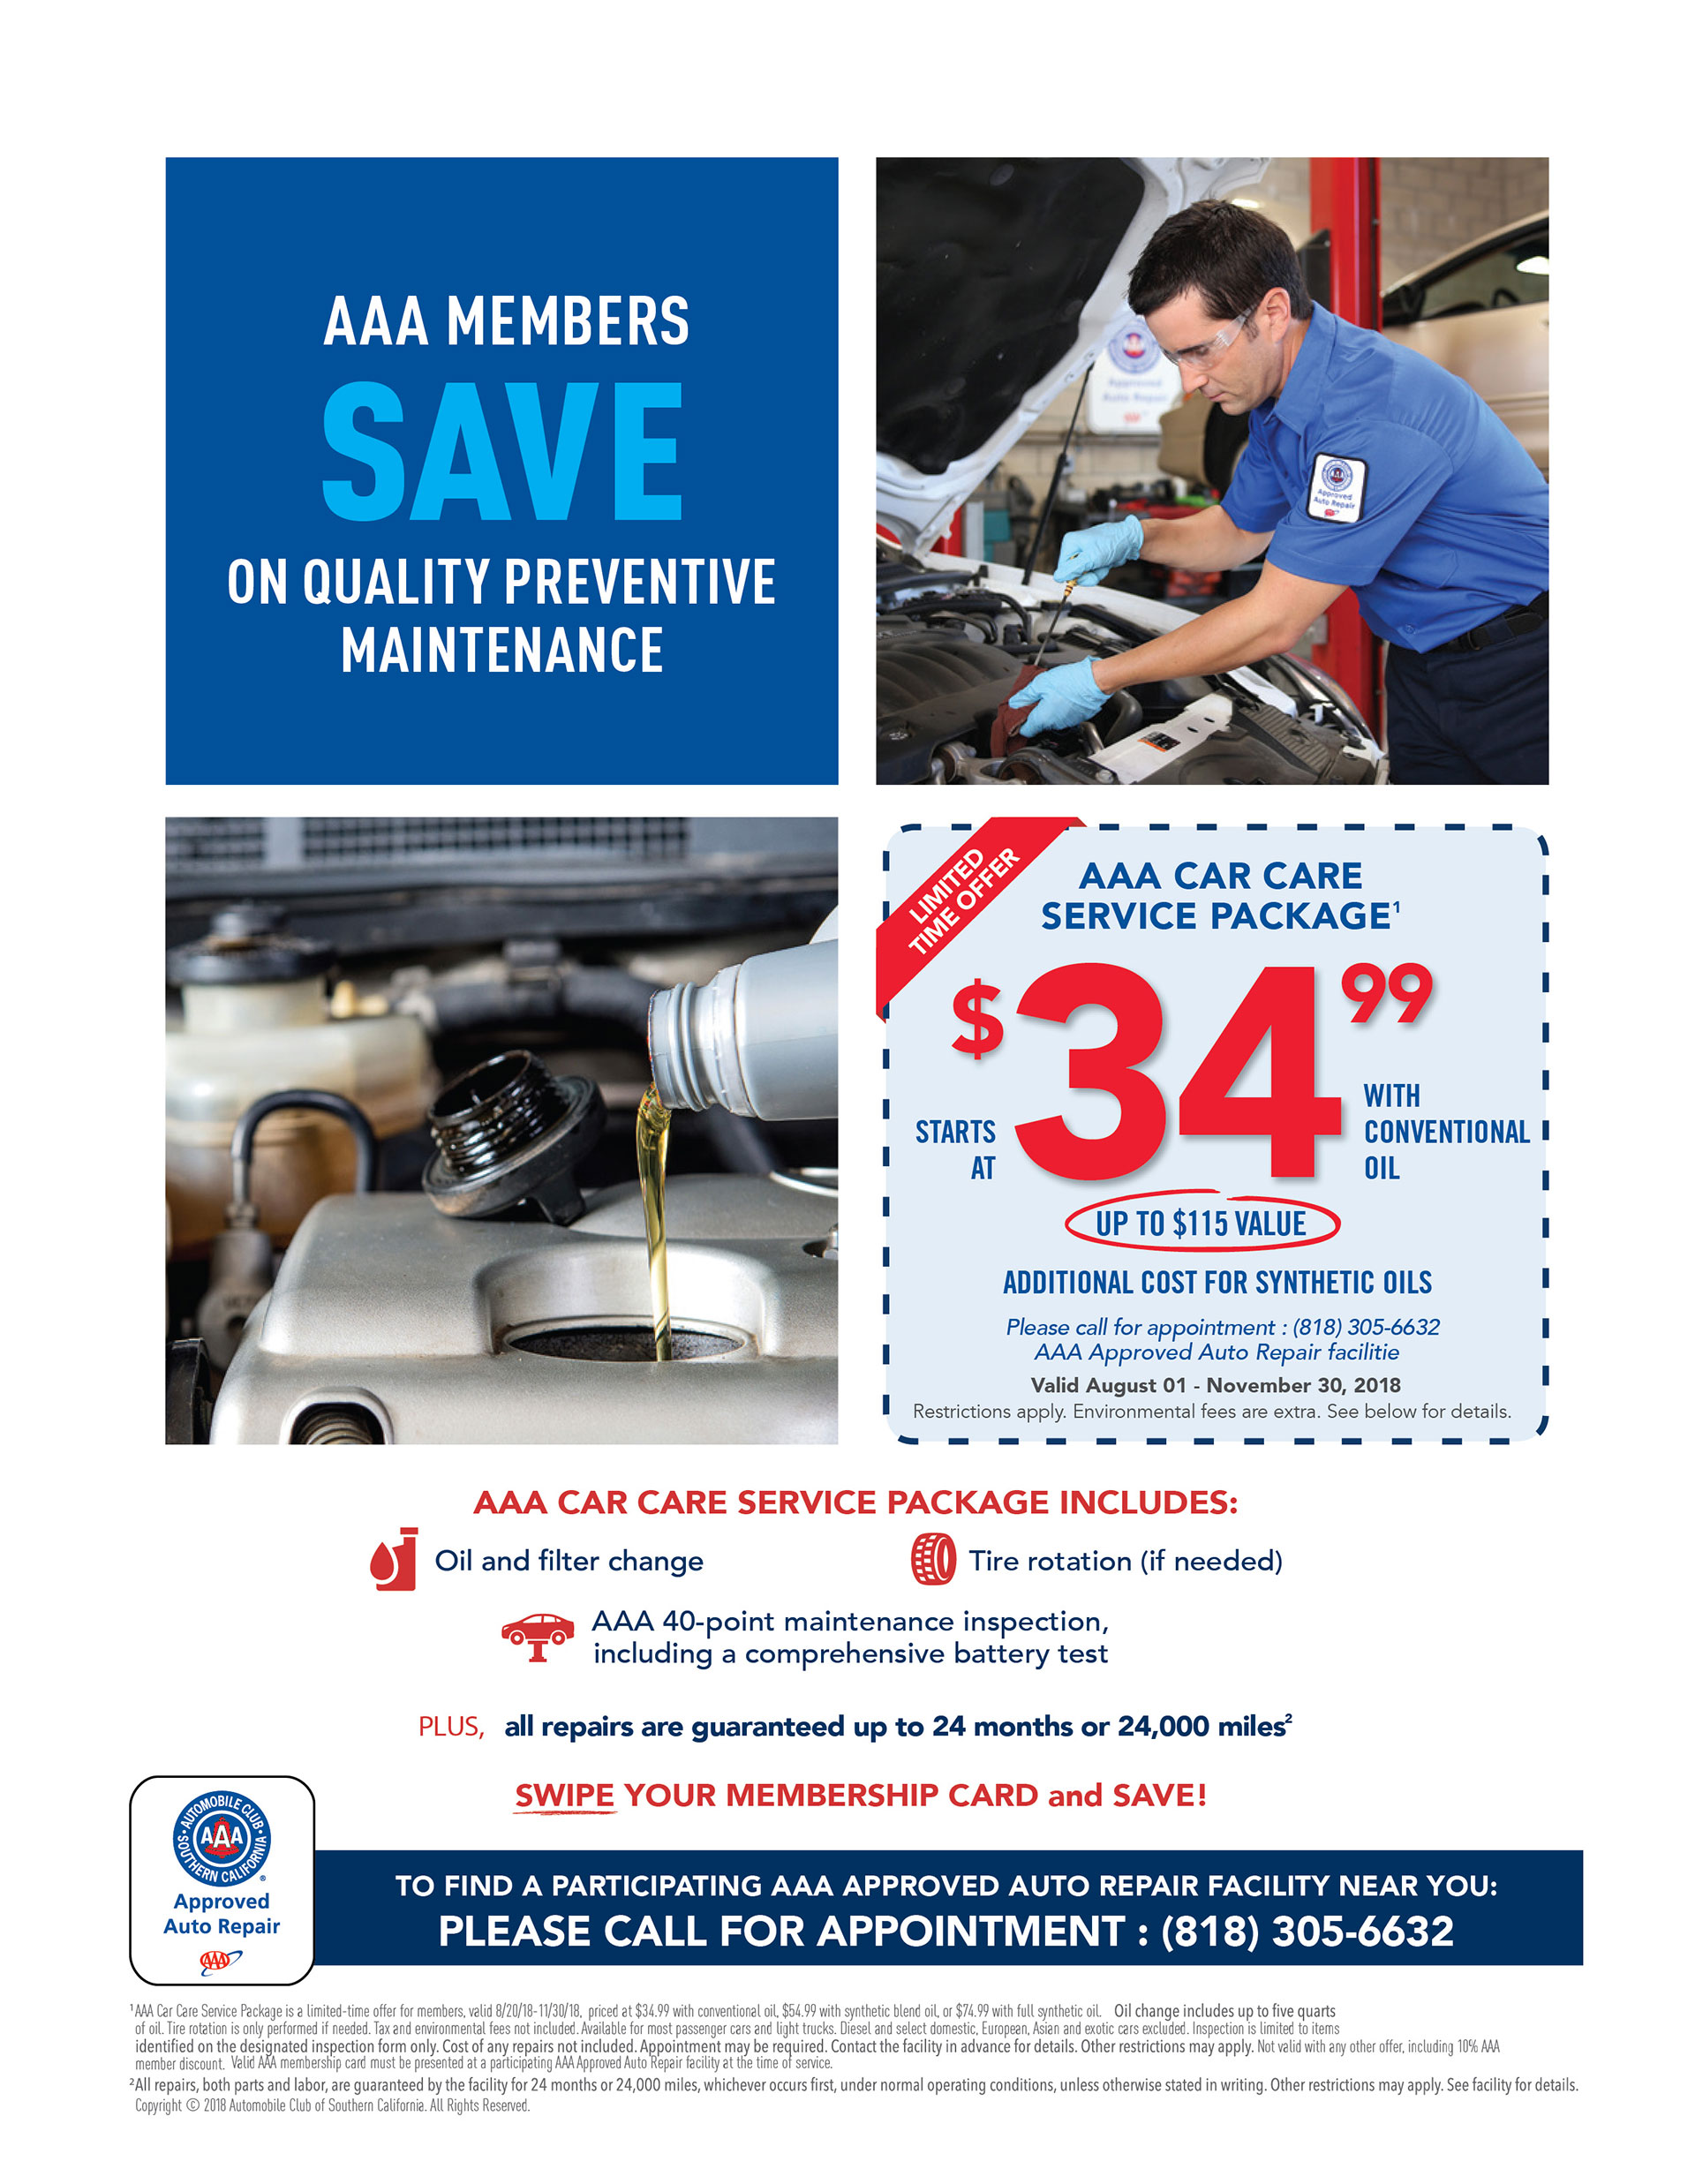 AAA Members Save on Quality Preventive Maintenance